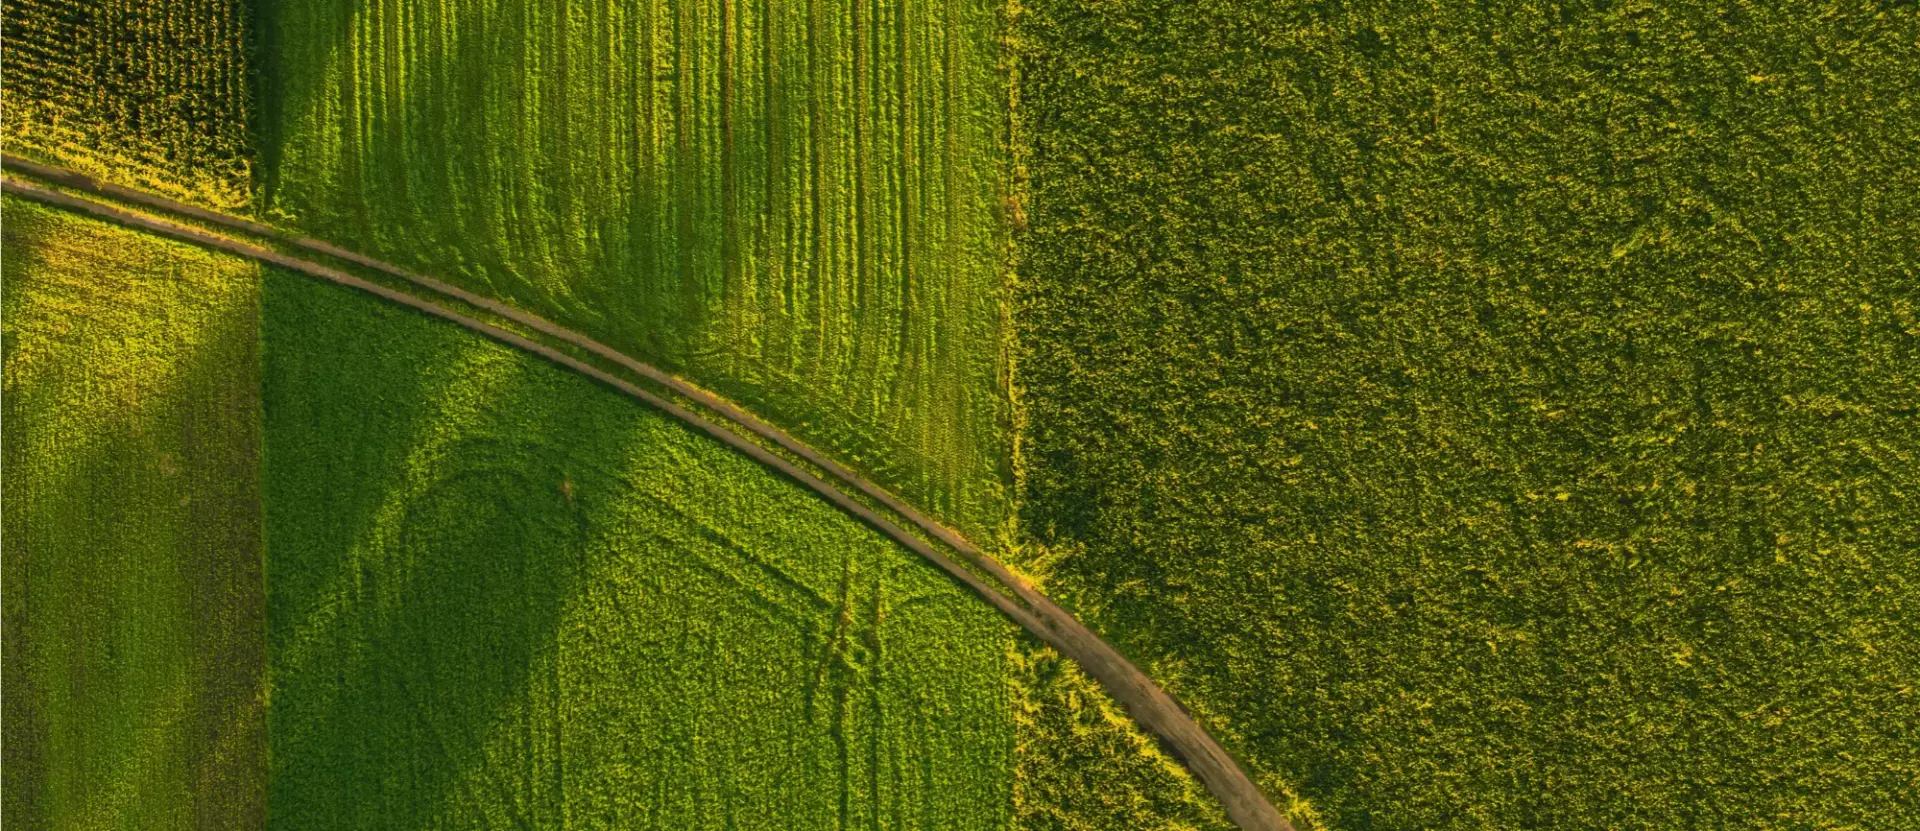 Overhead view of a green field.